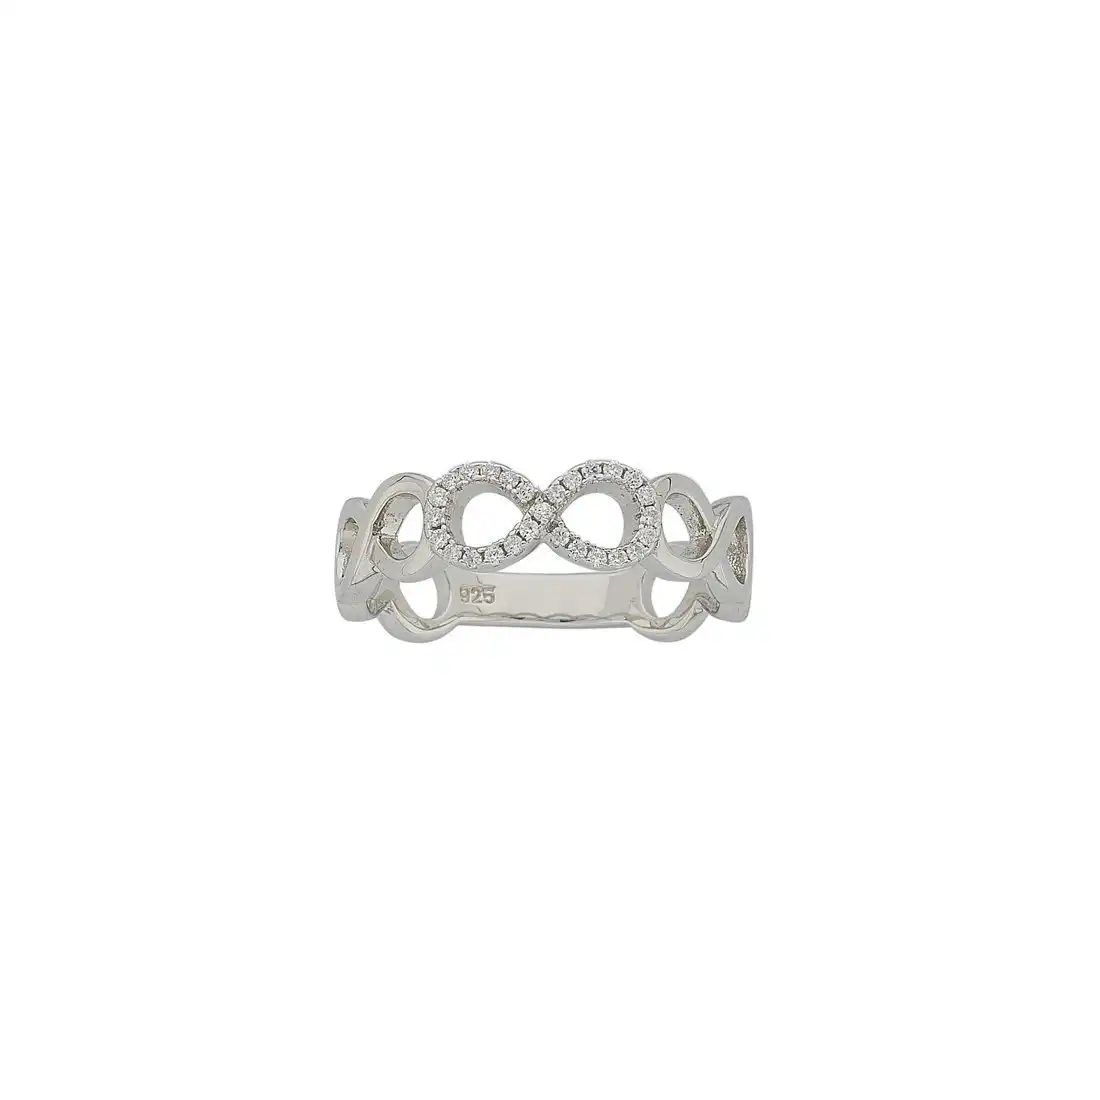 Stainless Steel Alternate Plain And Cubic Zirconia Set Infinity Pattern Ring